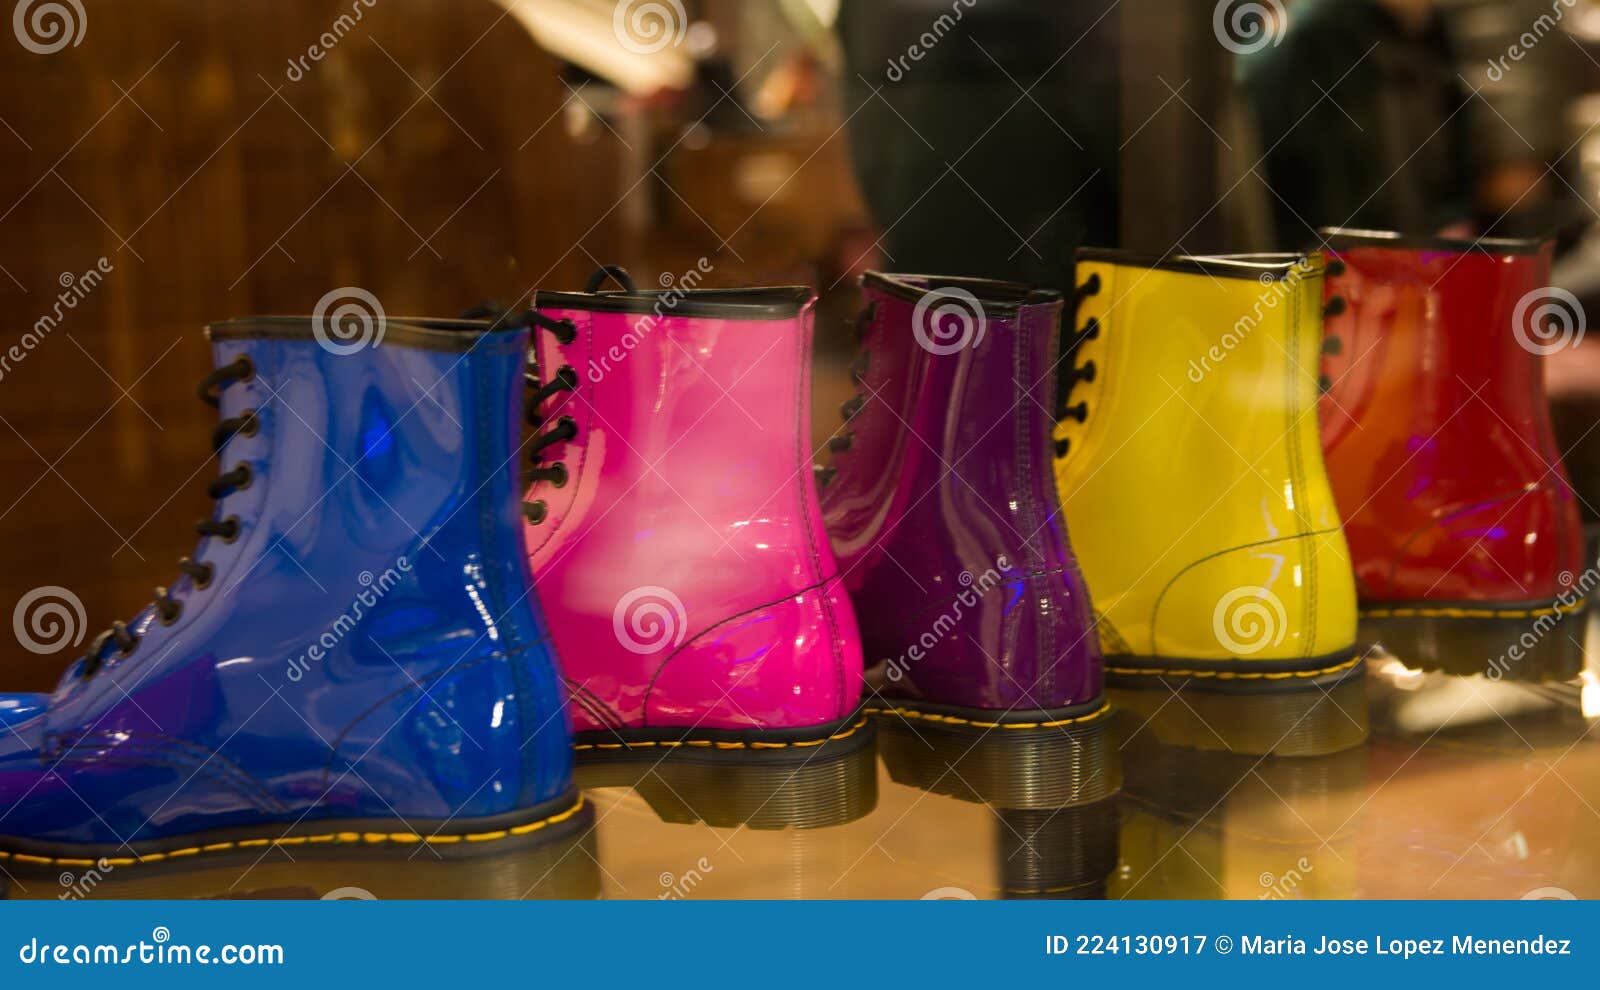 Five Shining Boots in a Row in a Storefront. Same Model, Five Different ...